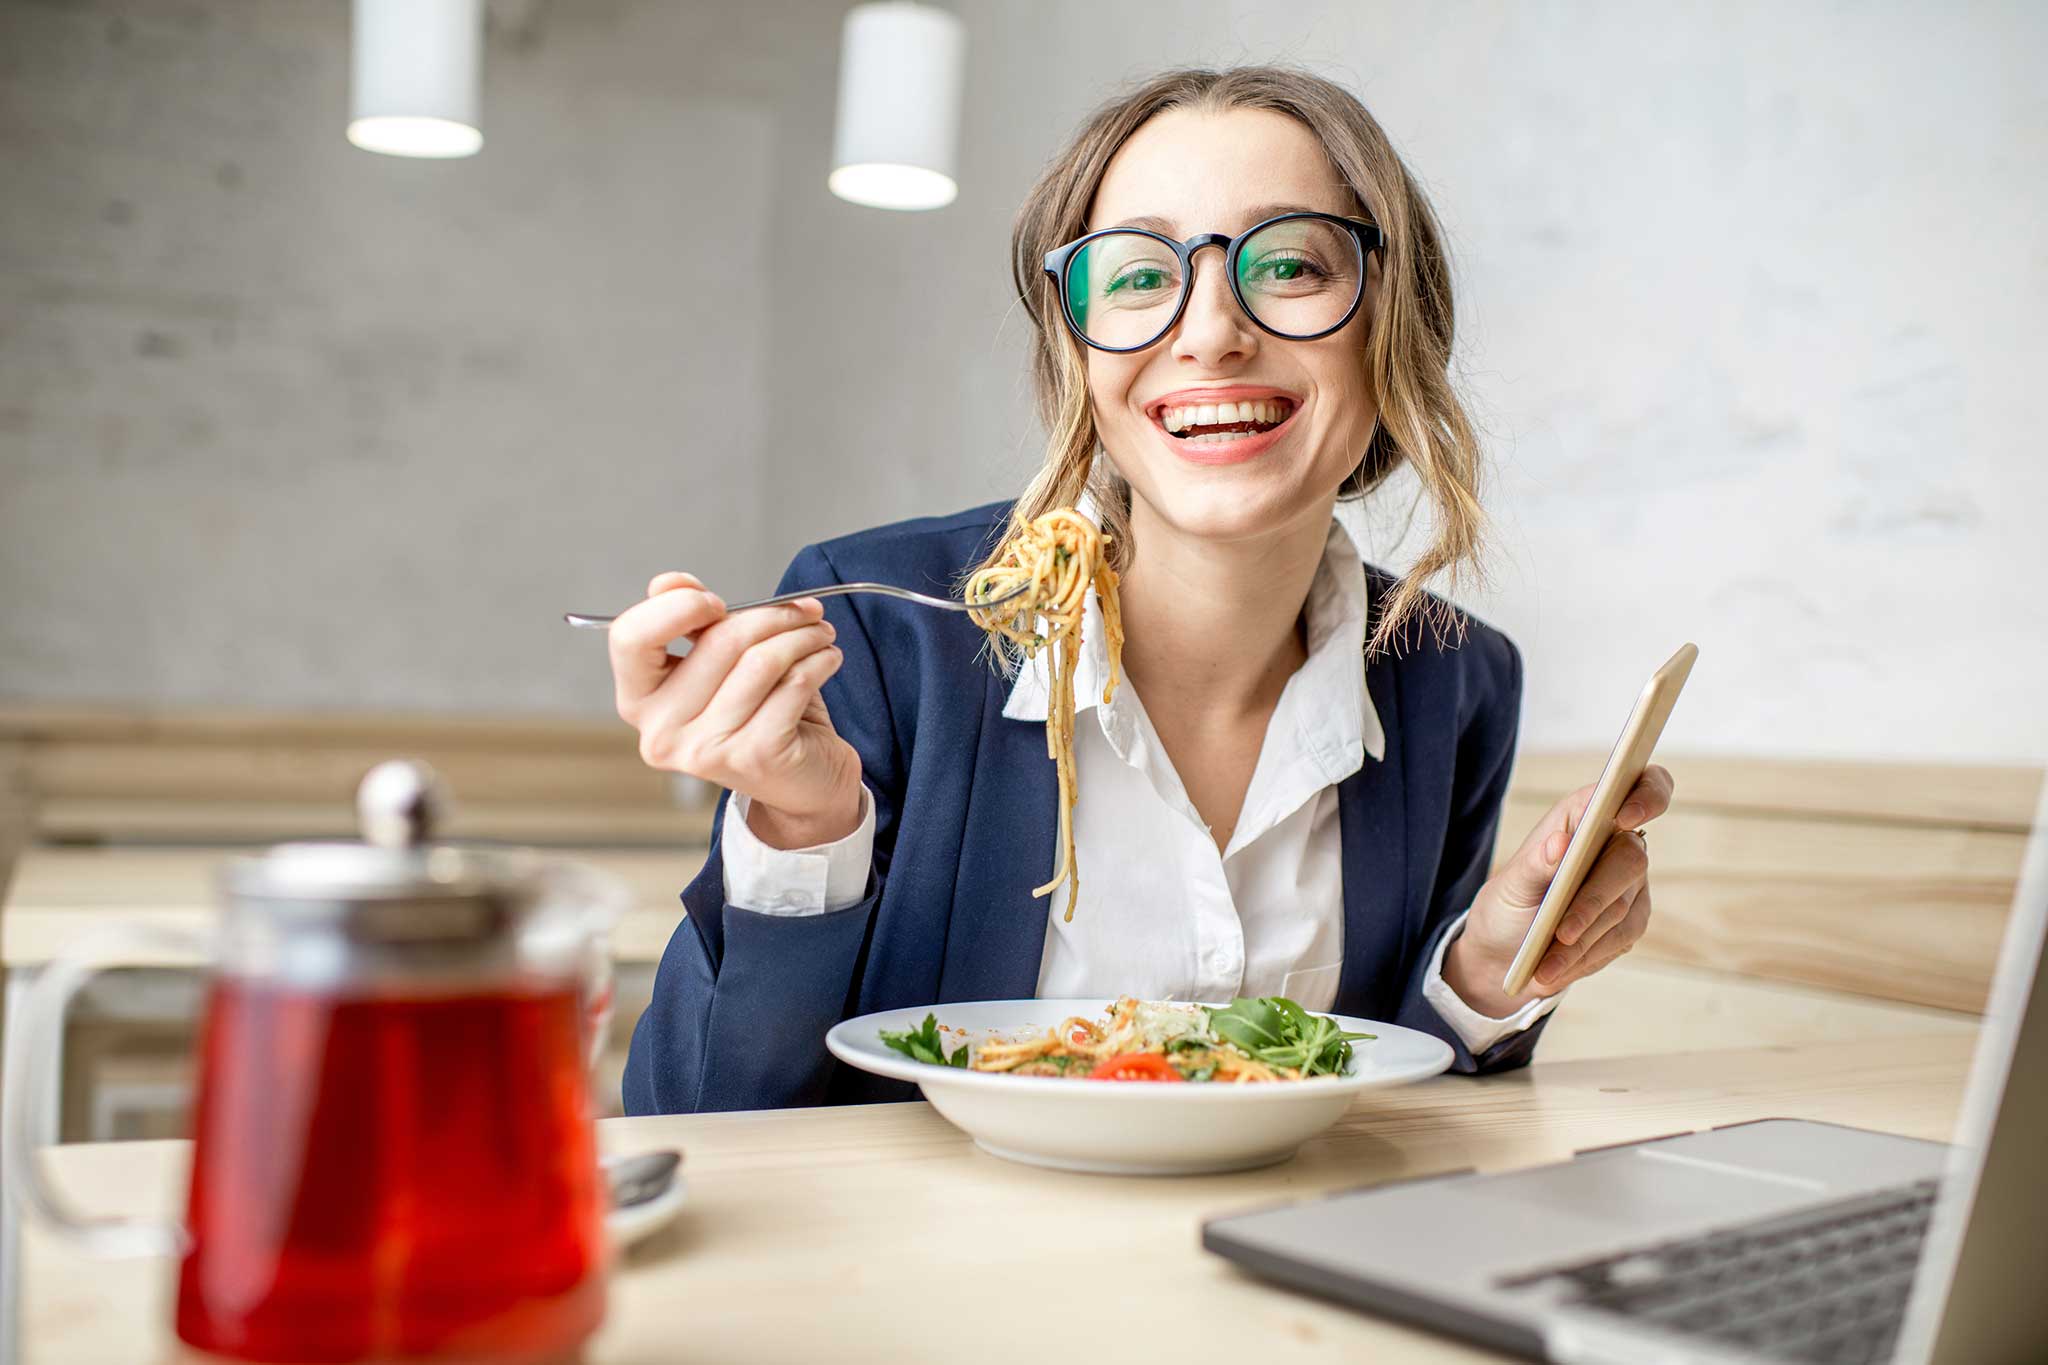 A woman smiling as she eats noodles in front of her laptop